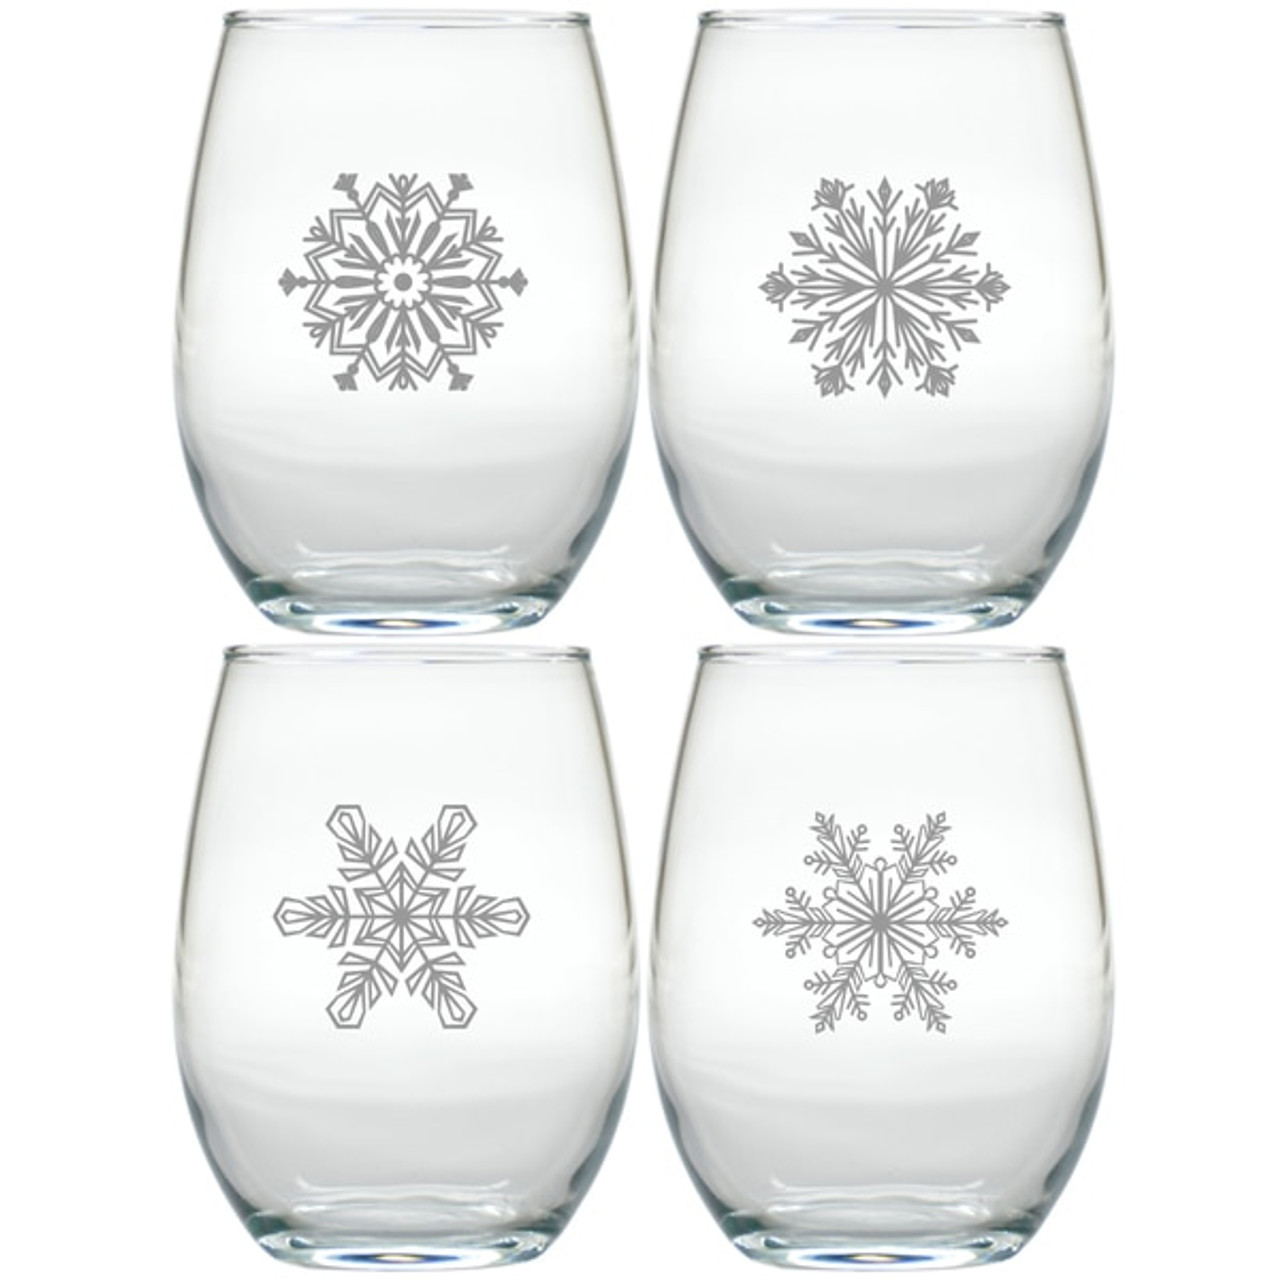 https://cdn11.bigcommerce.com/s-97fac/images/stencil/1280x1280/products/130490/199204/stemless-wine-tumbler-set-of-4-glass-modern-snowflakes-6__77942.1515987713__48745.1610402796.jpg?c=2